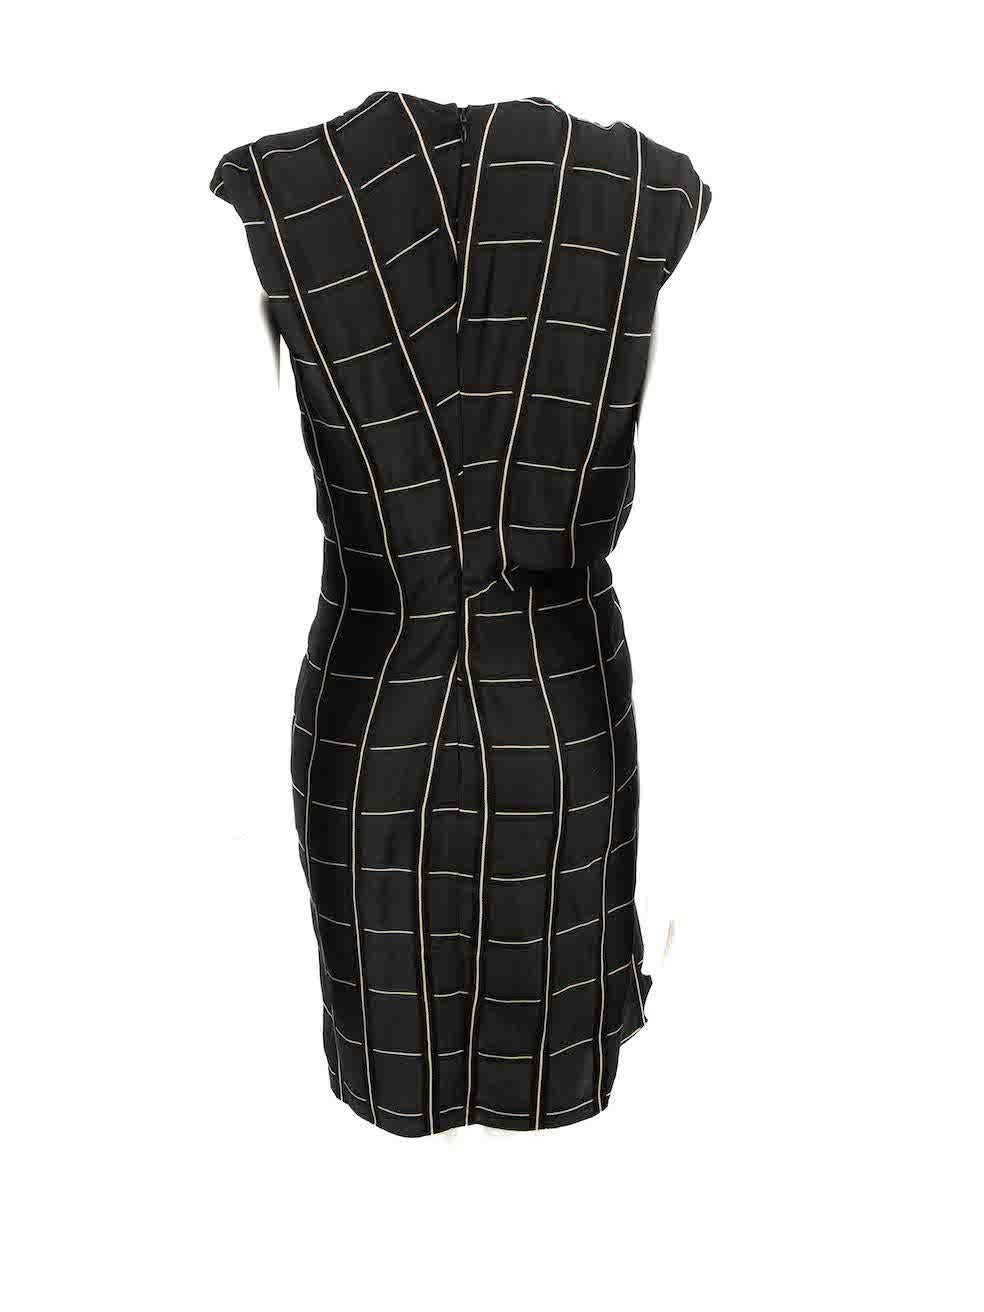 Lanvin Black Checked Knot Detail Dress Size XS In Good Condition For Sale In London, GB